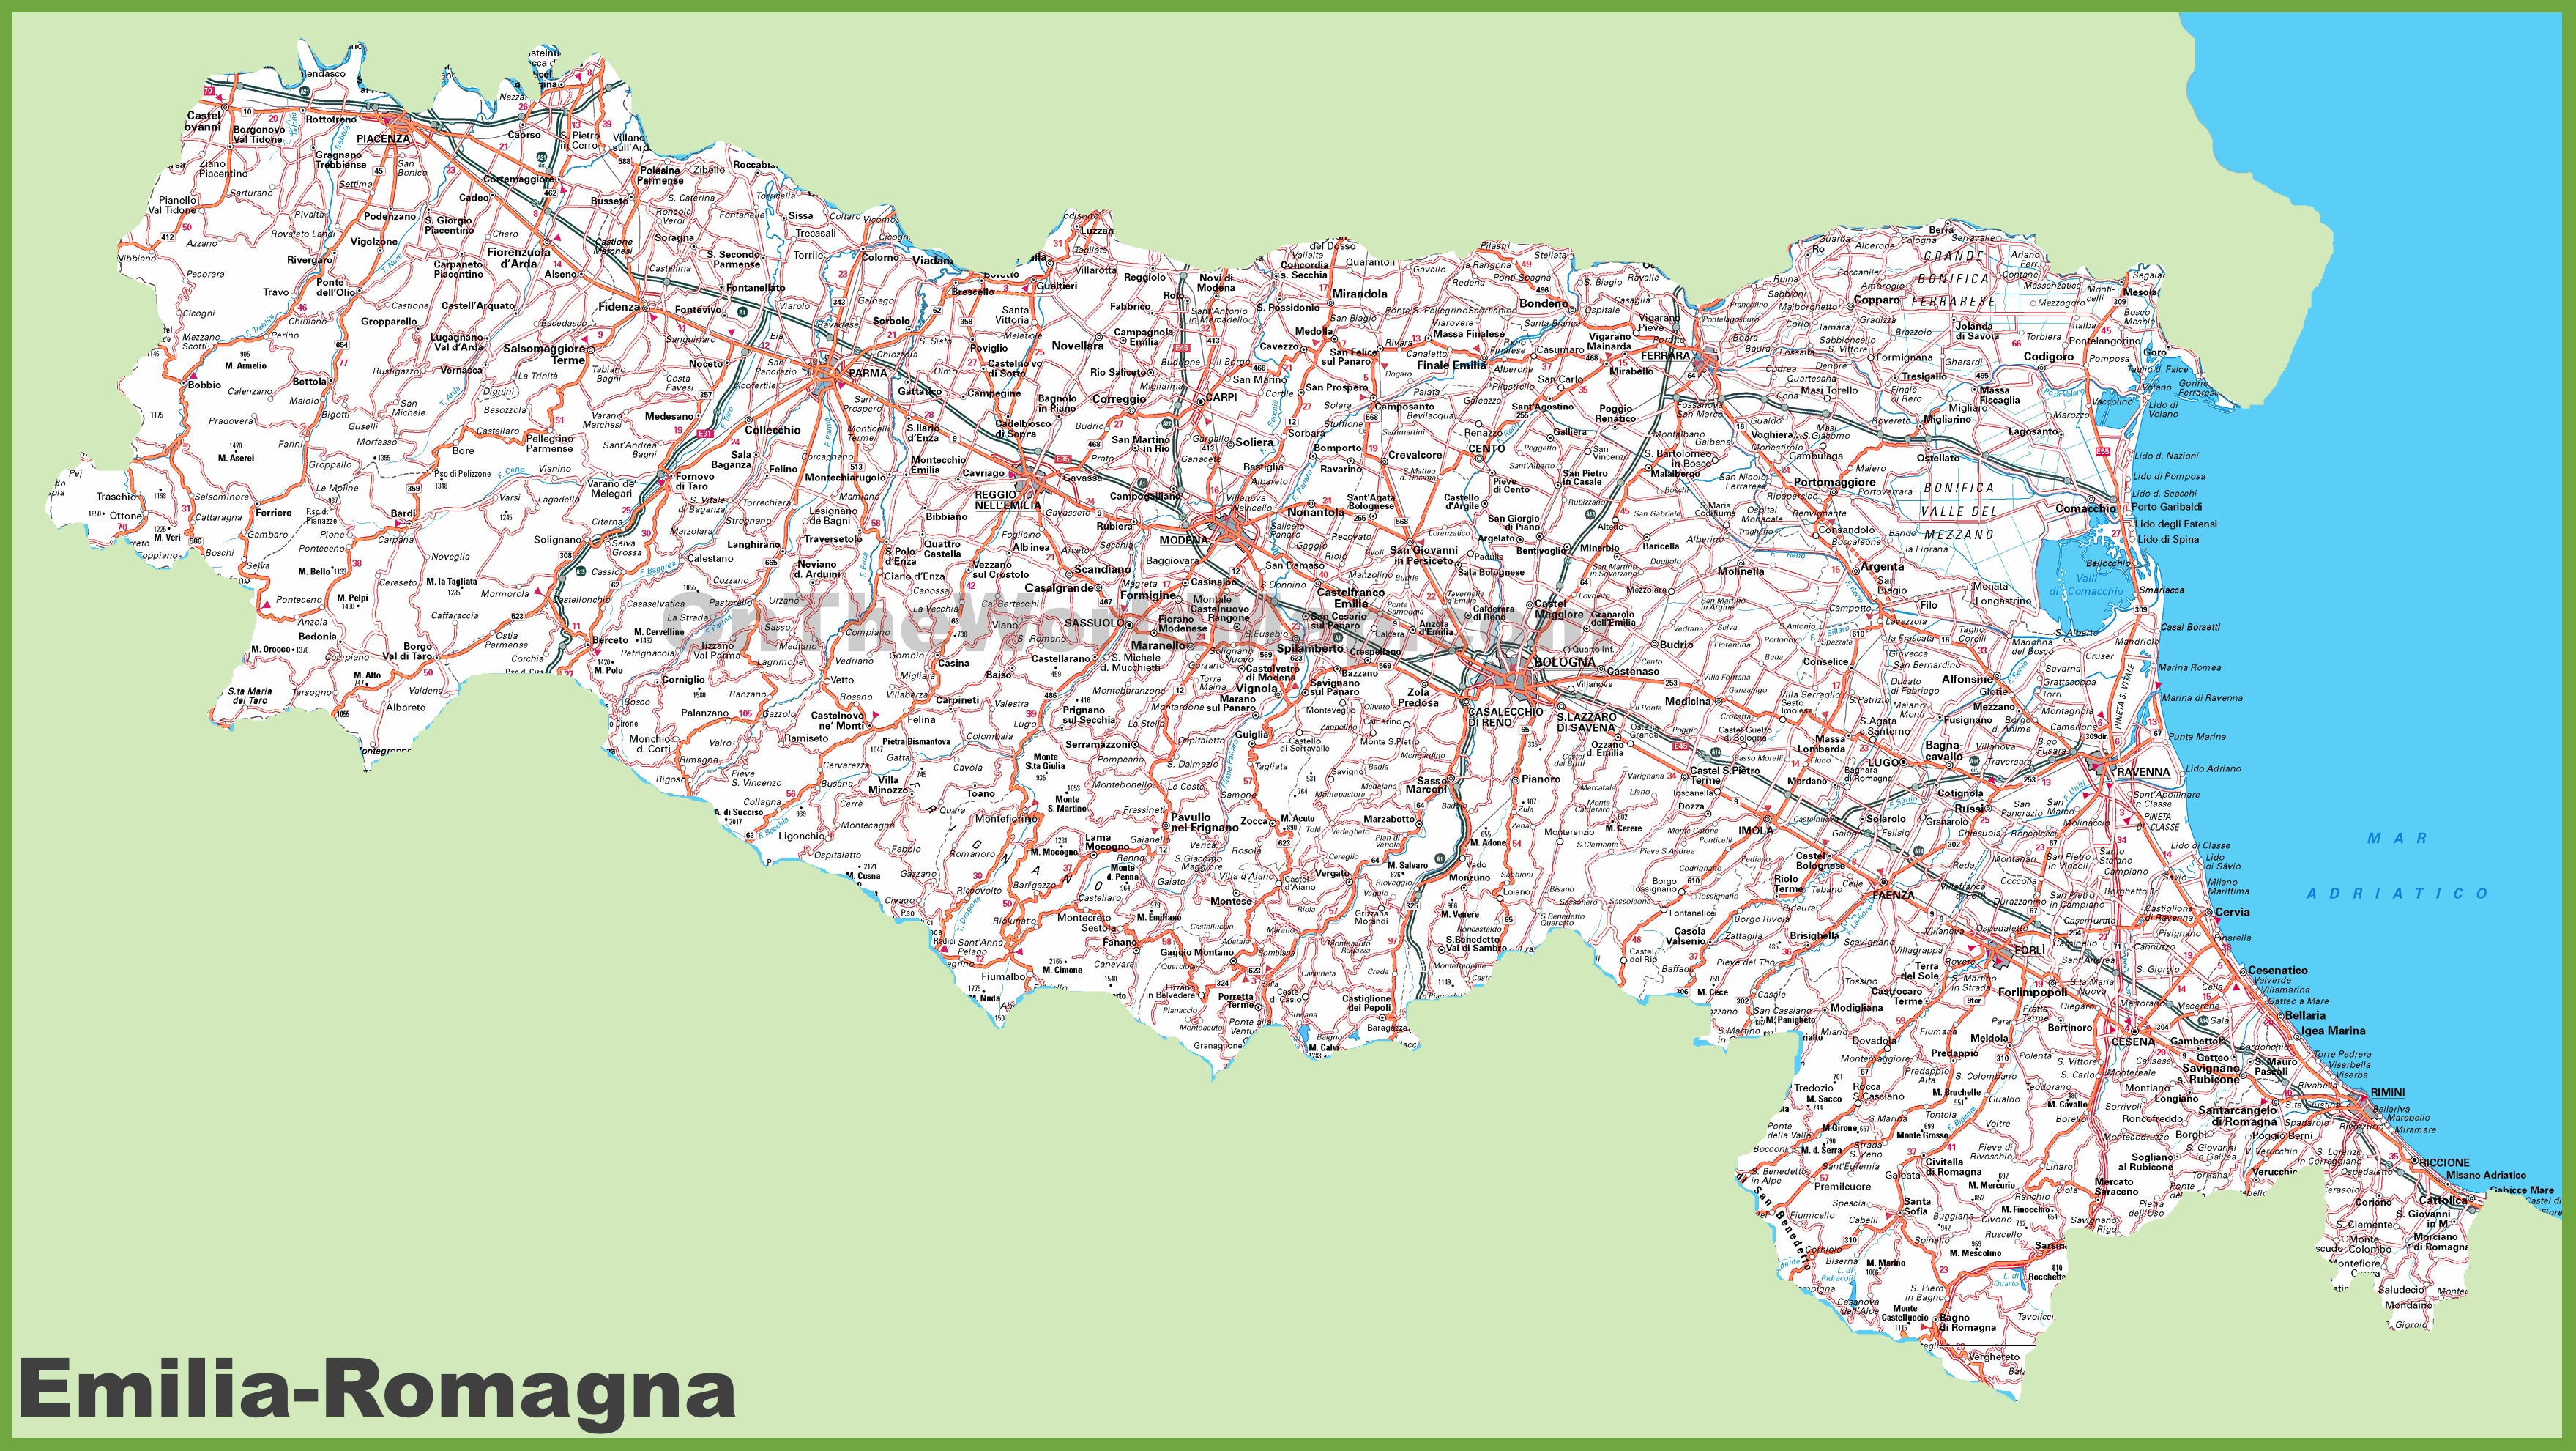 Where can you find a detailed map of Italy that shows cities and towns?